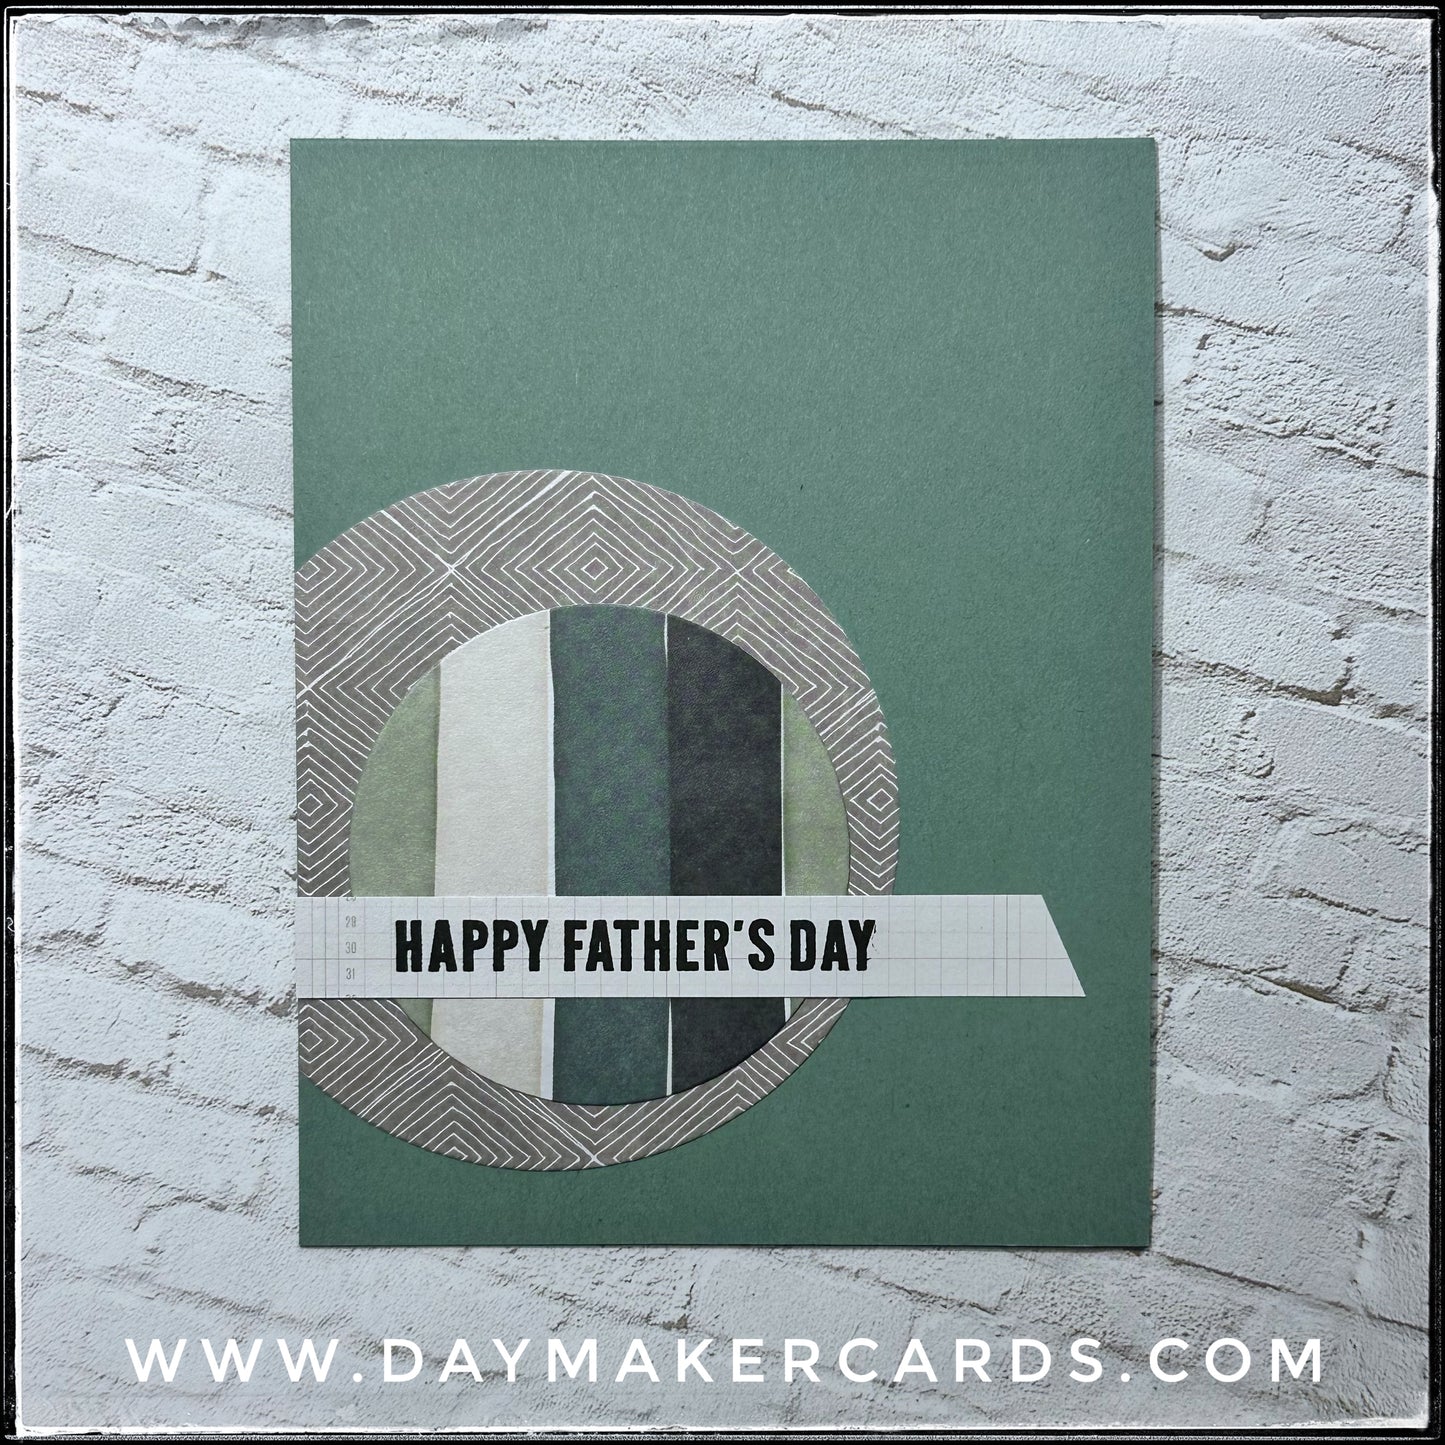 Happy Father's Day Handmade Card